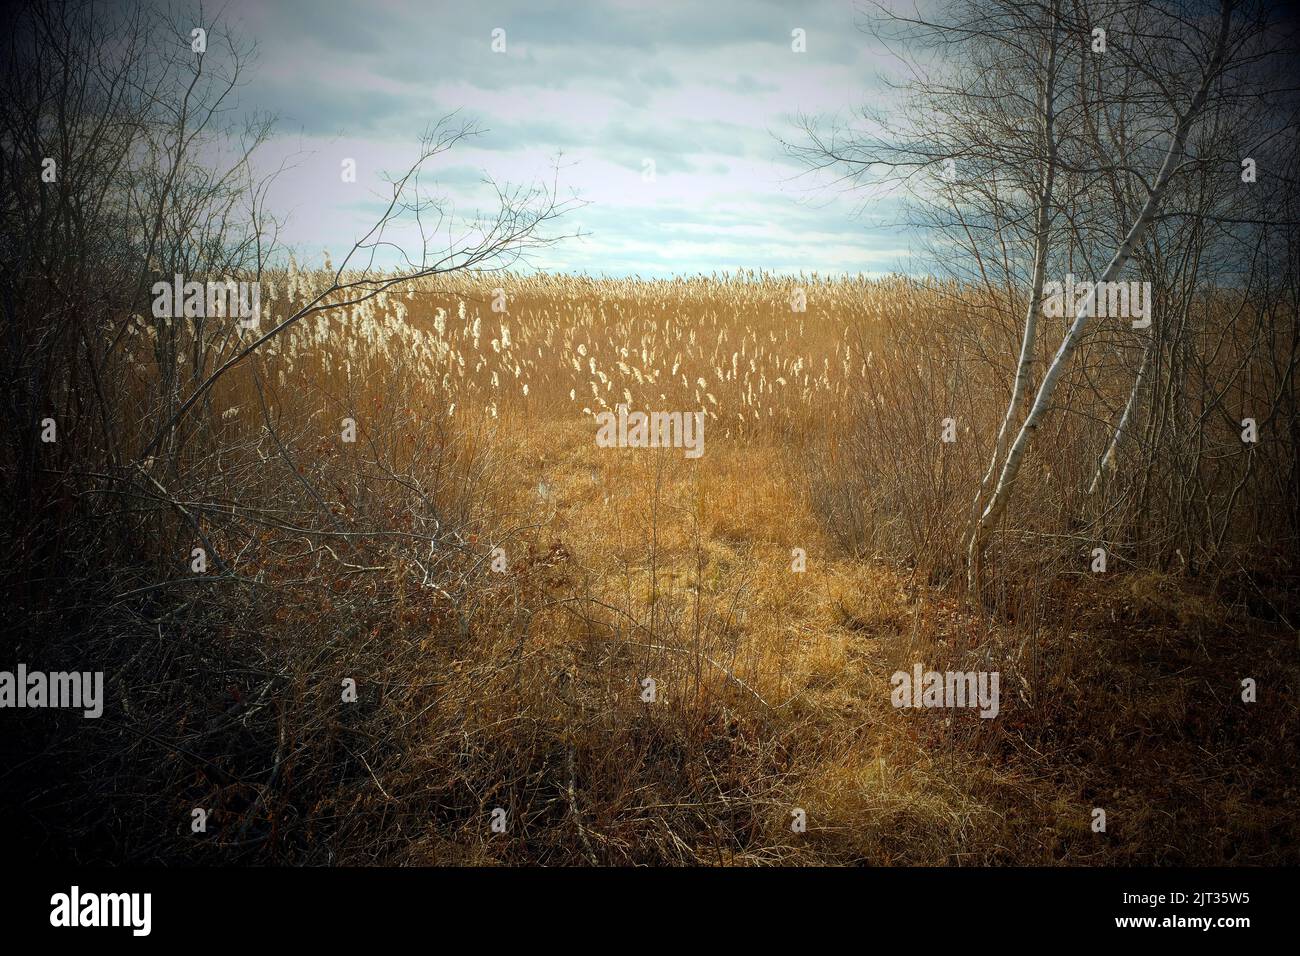 View of Field of Tall Grass through opening of Bare Birch Trees Stock Photo